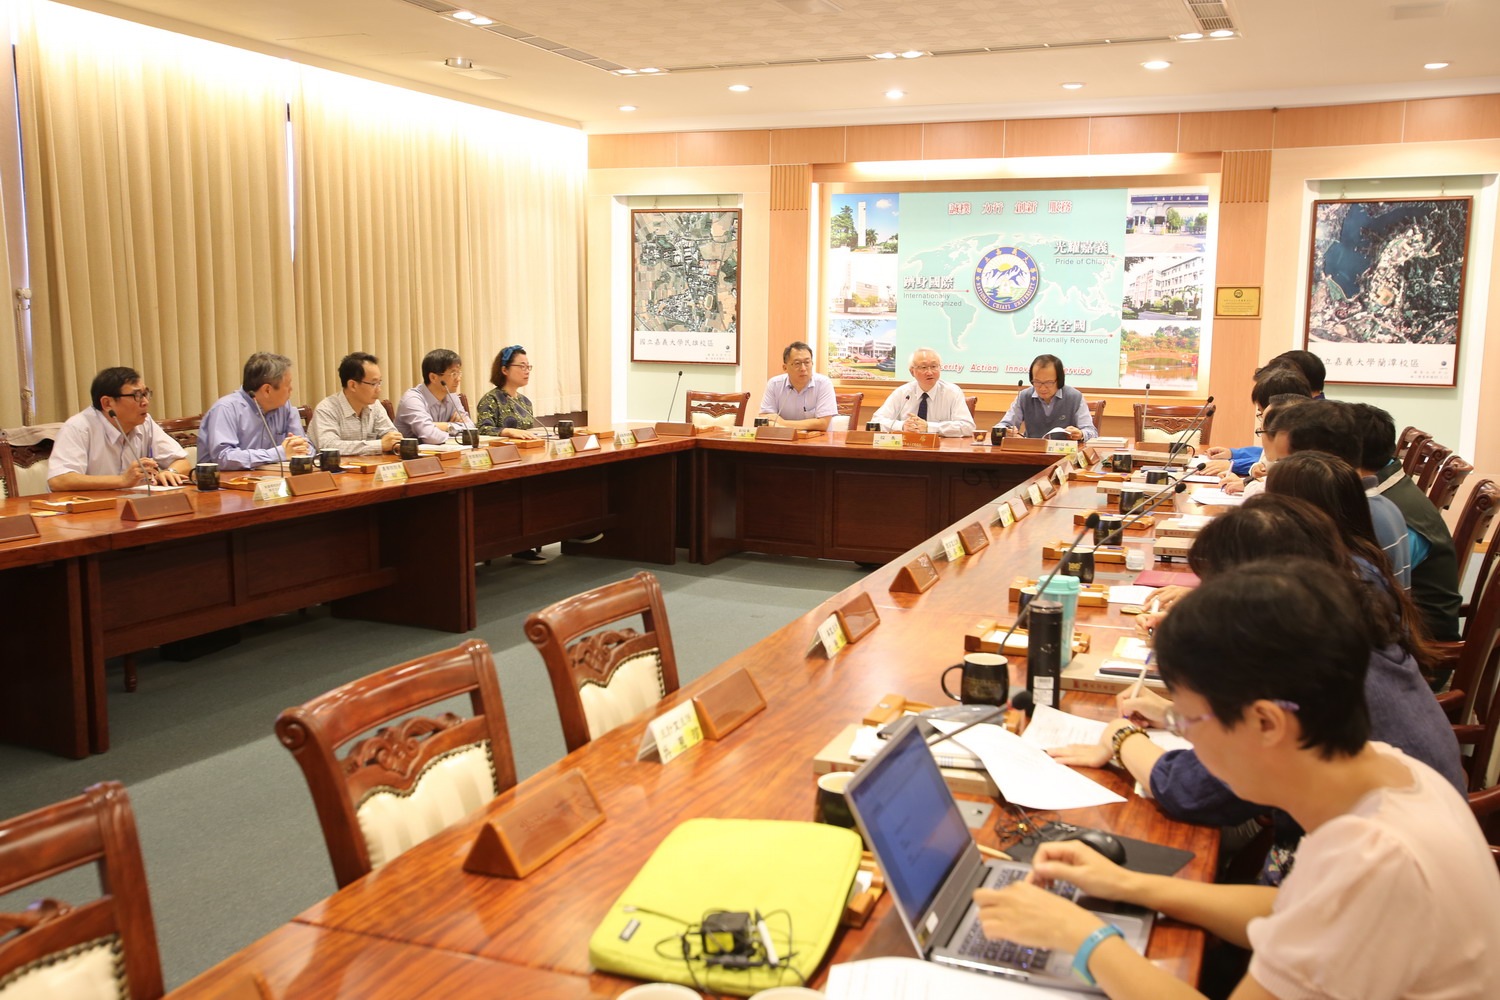 NCYU President Chyung Ay met with the first-level supervisors and staff to plan specific measures.